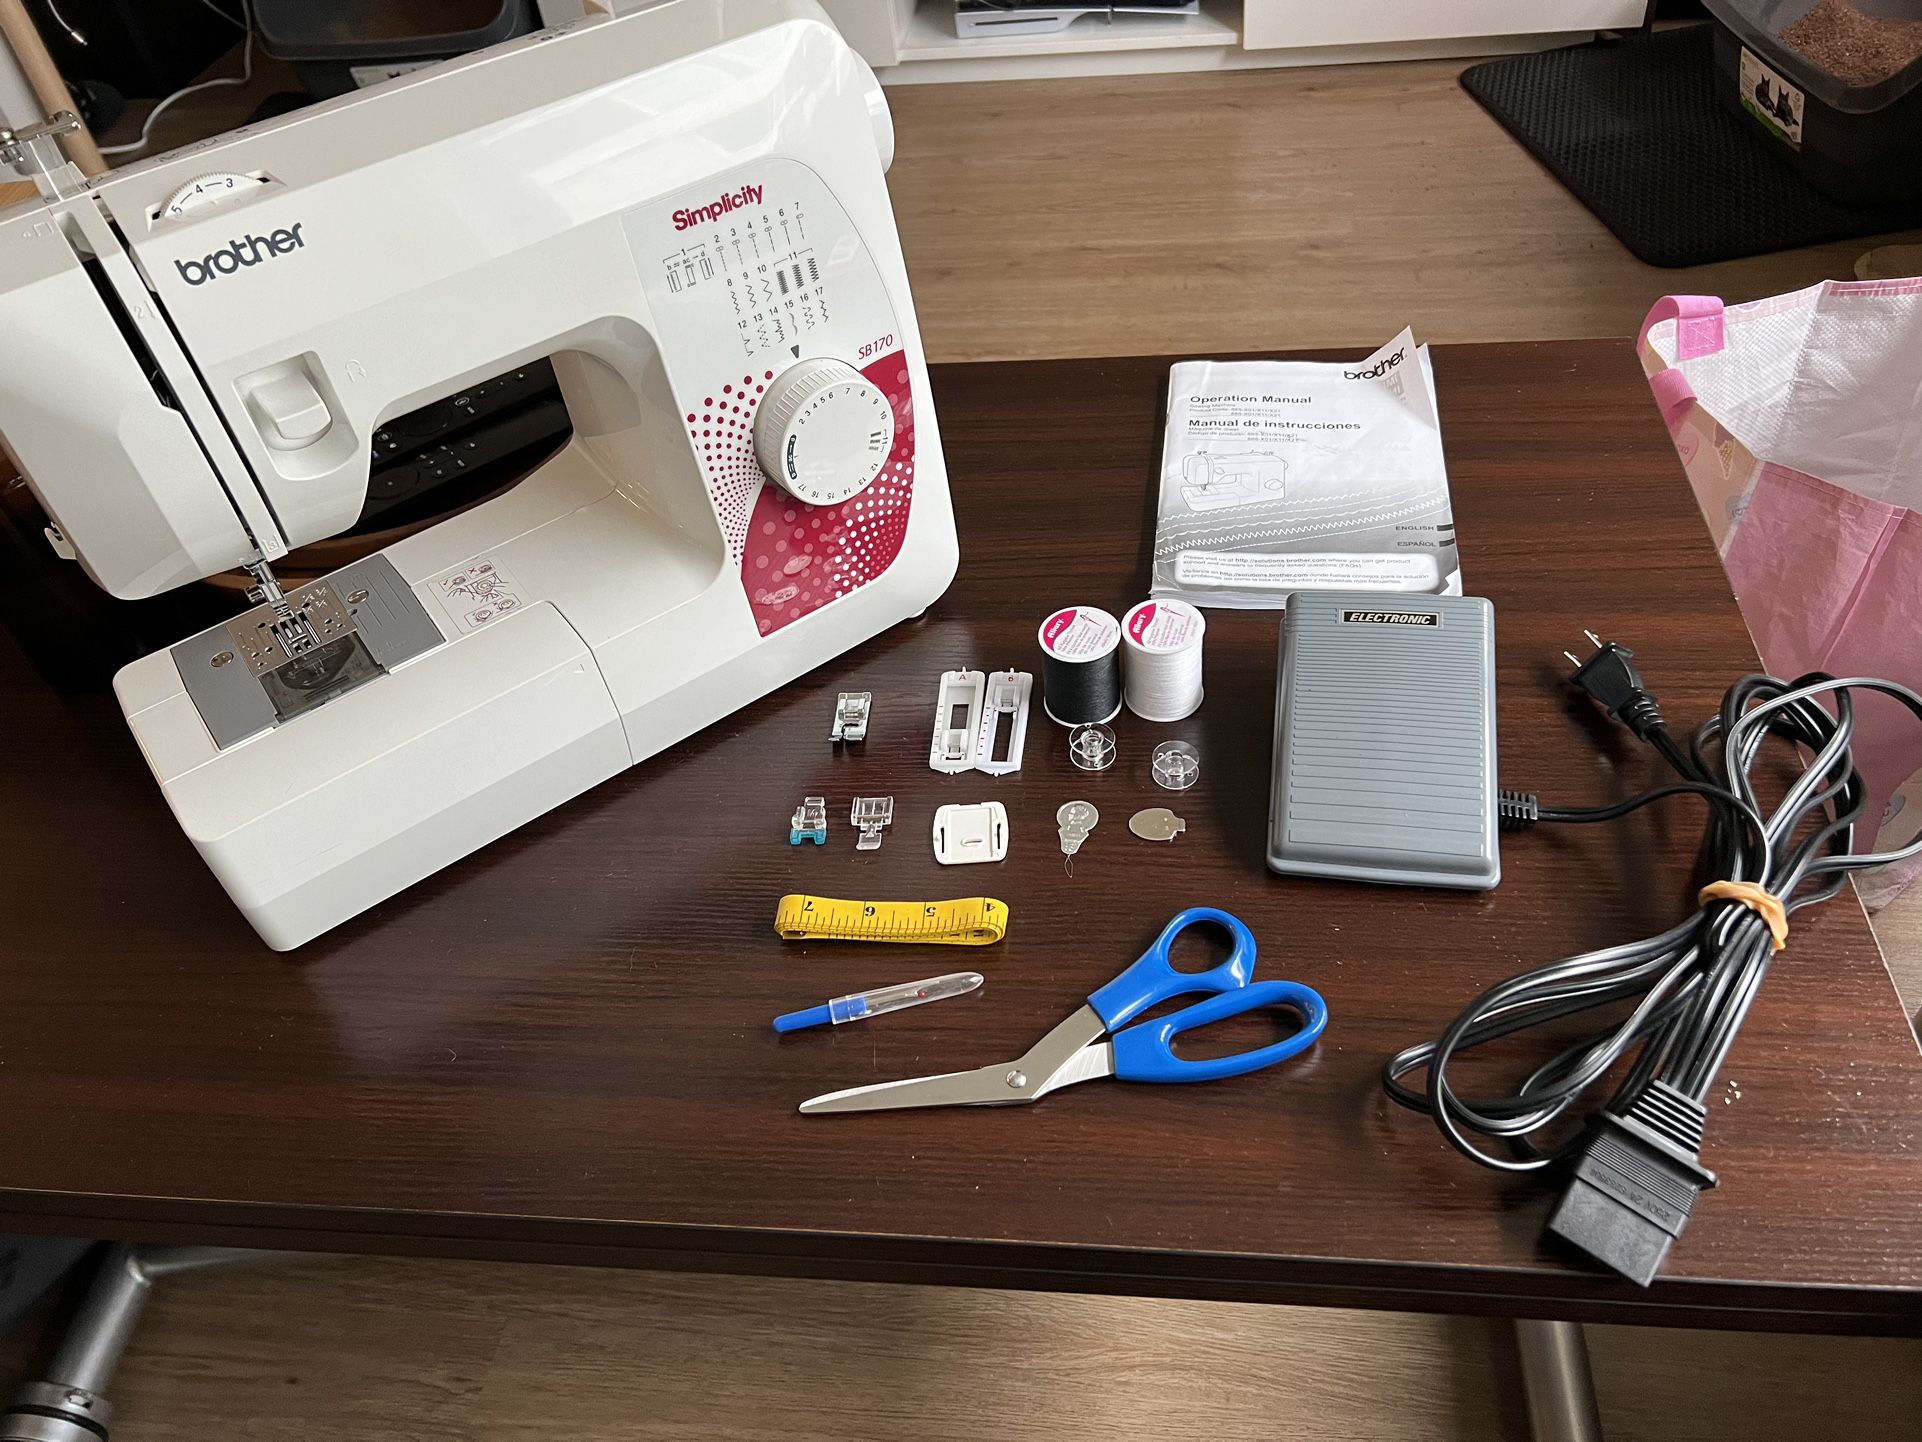 Brother SB170 Simplicity Sewing Machine + Accessories